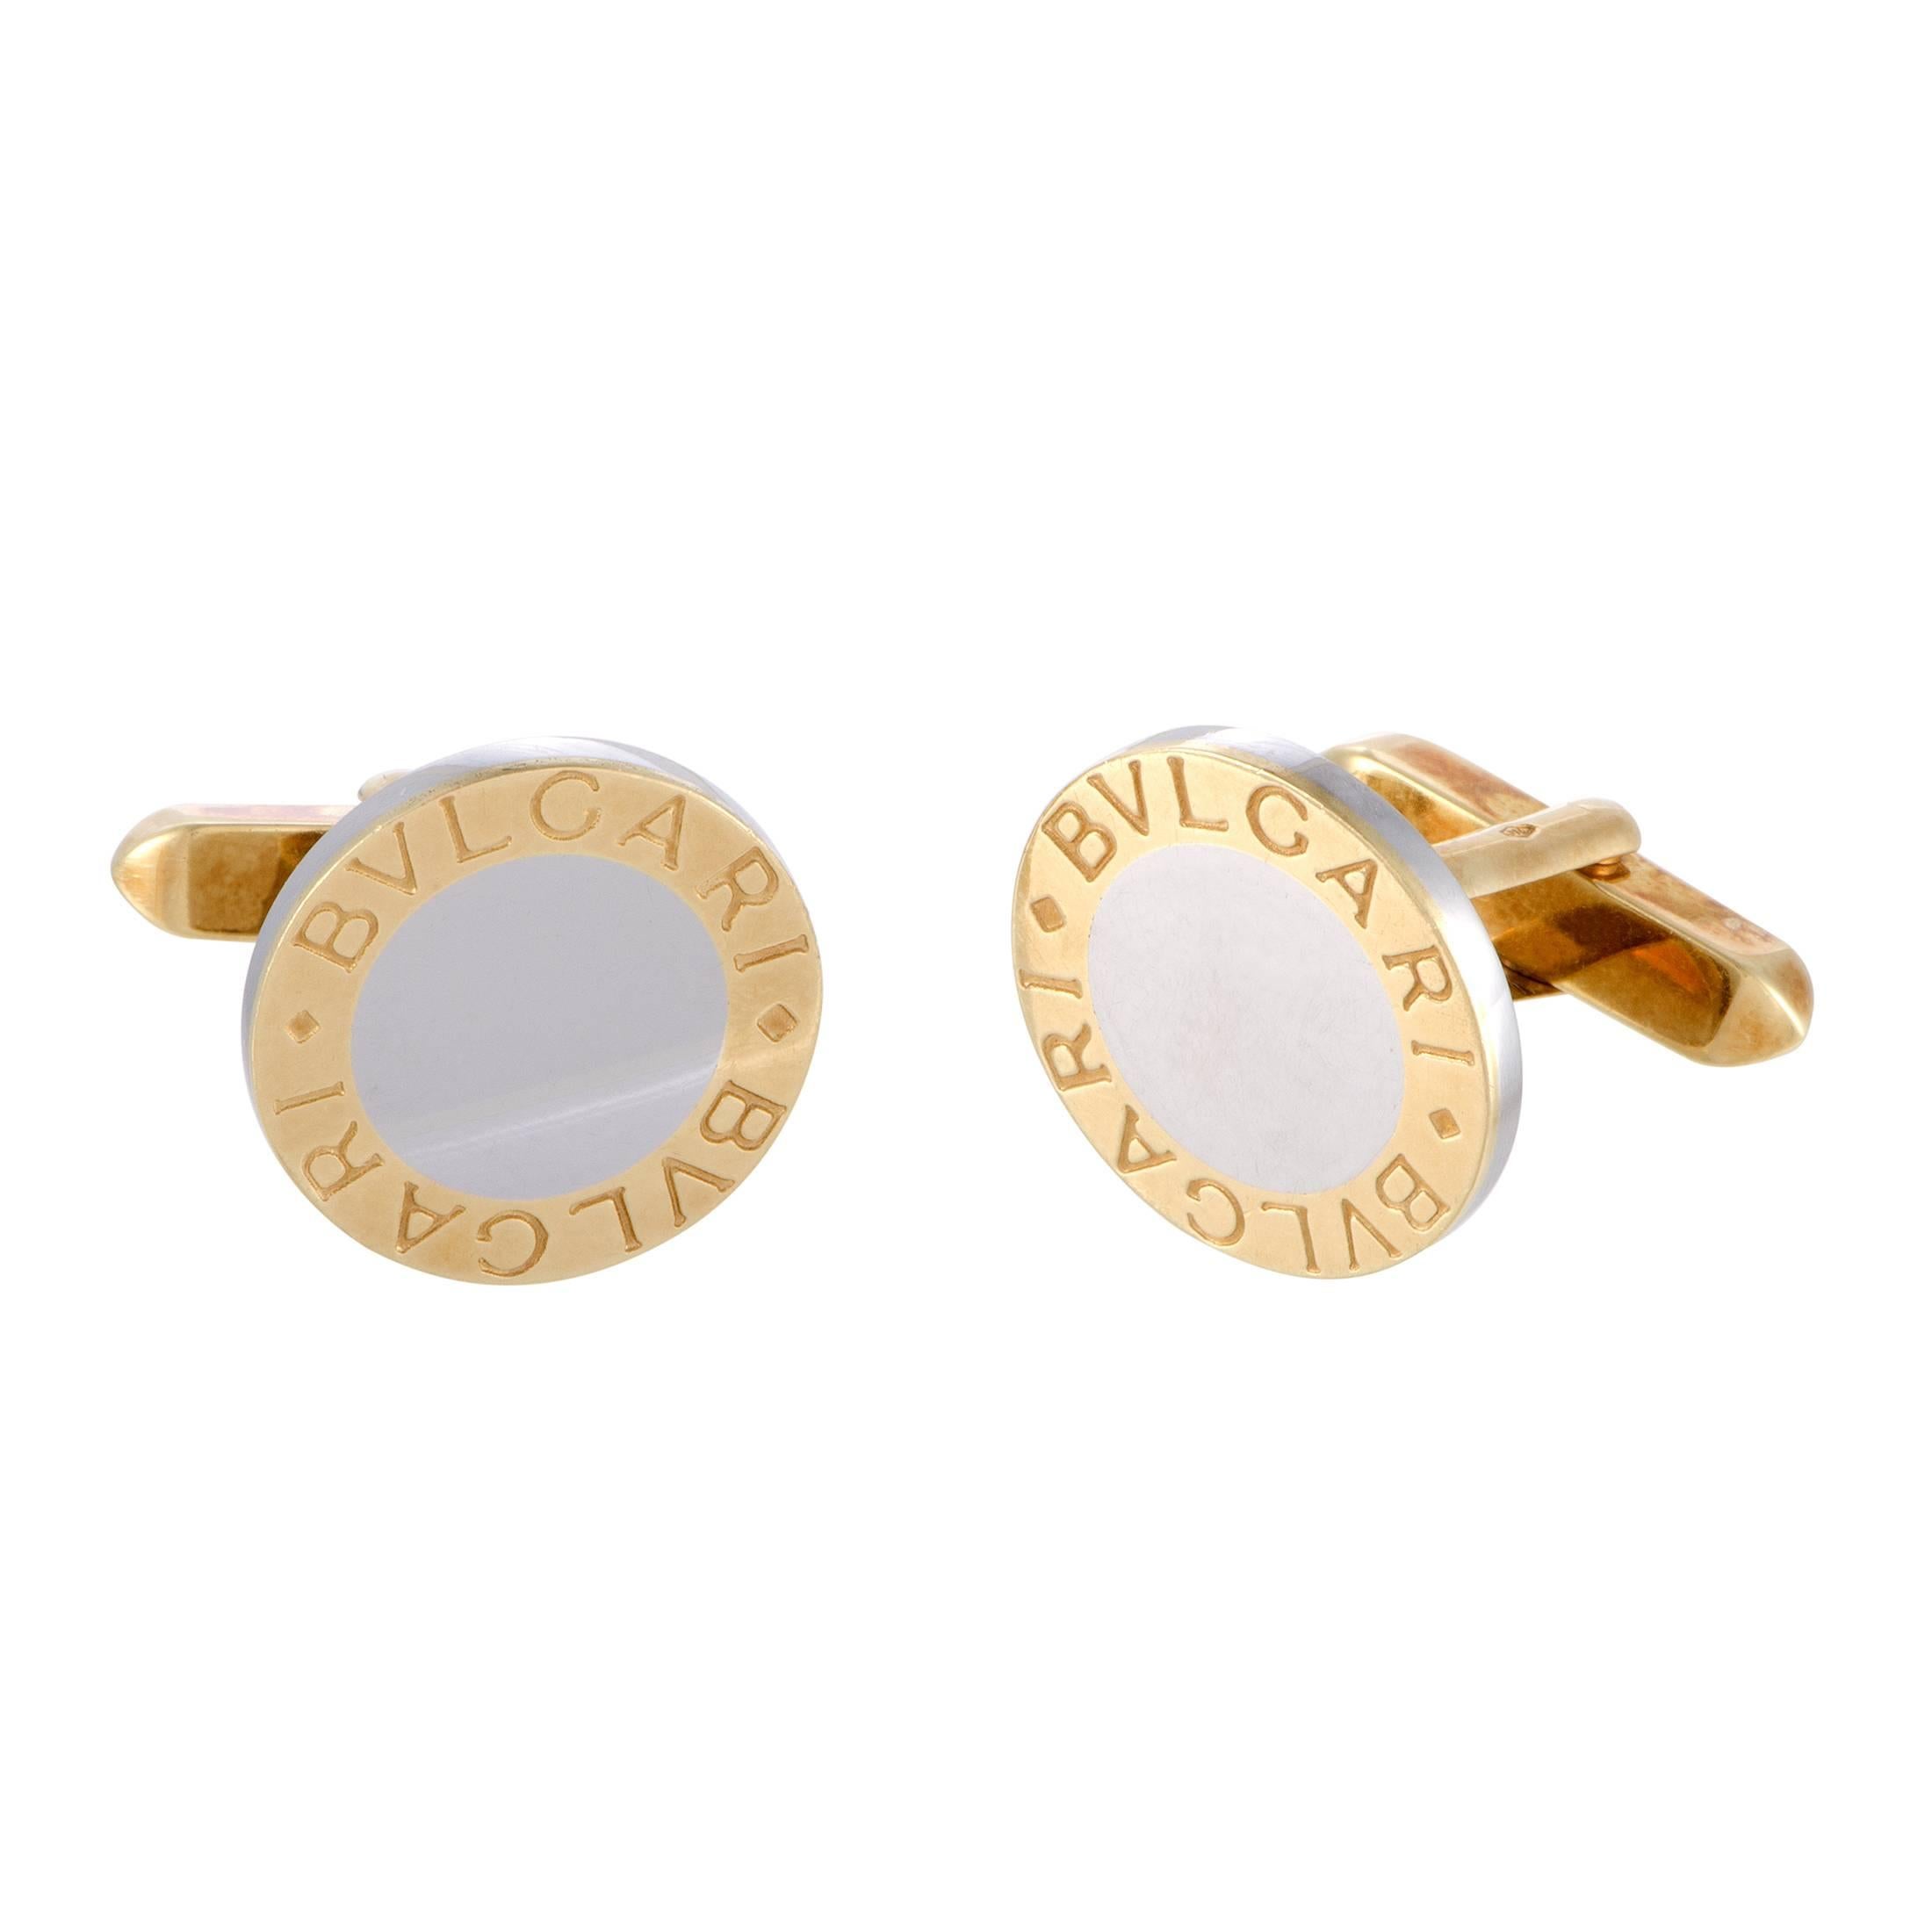 The brand's authentic style of contemporary excellence, elegance and refinement can be clearly seen in this fantastic set of cufflinks and tuxedo buttons from Bulgari made of gleaming stainless steel and 18K yellow gold with delicate inscriptions